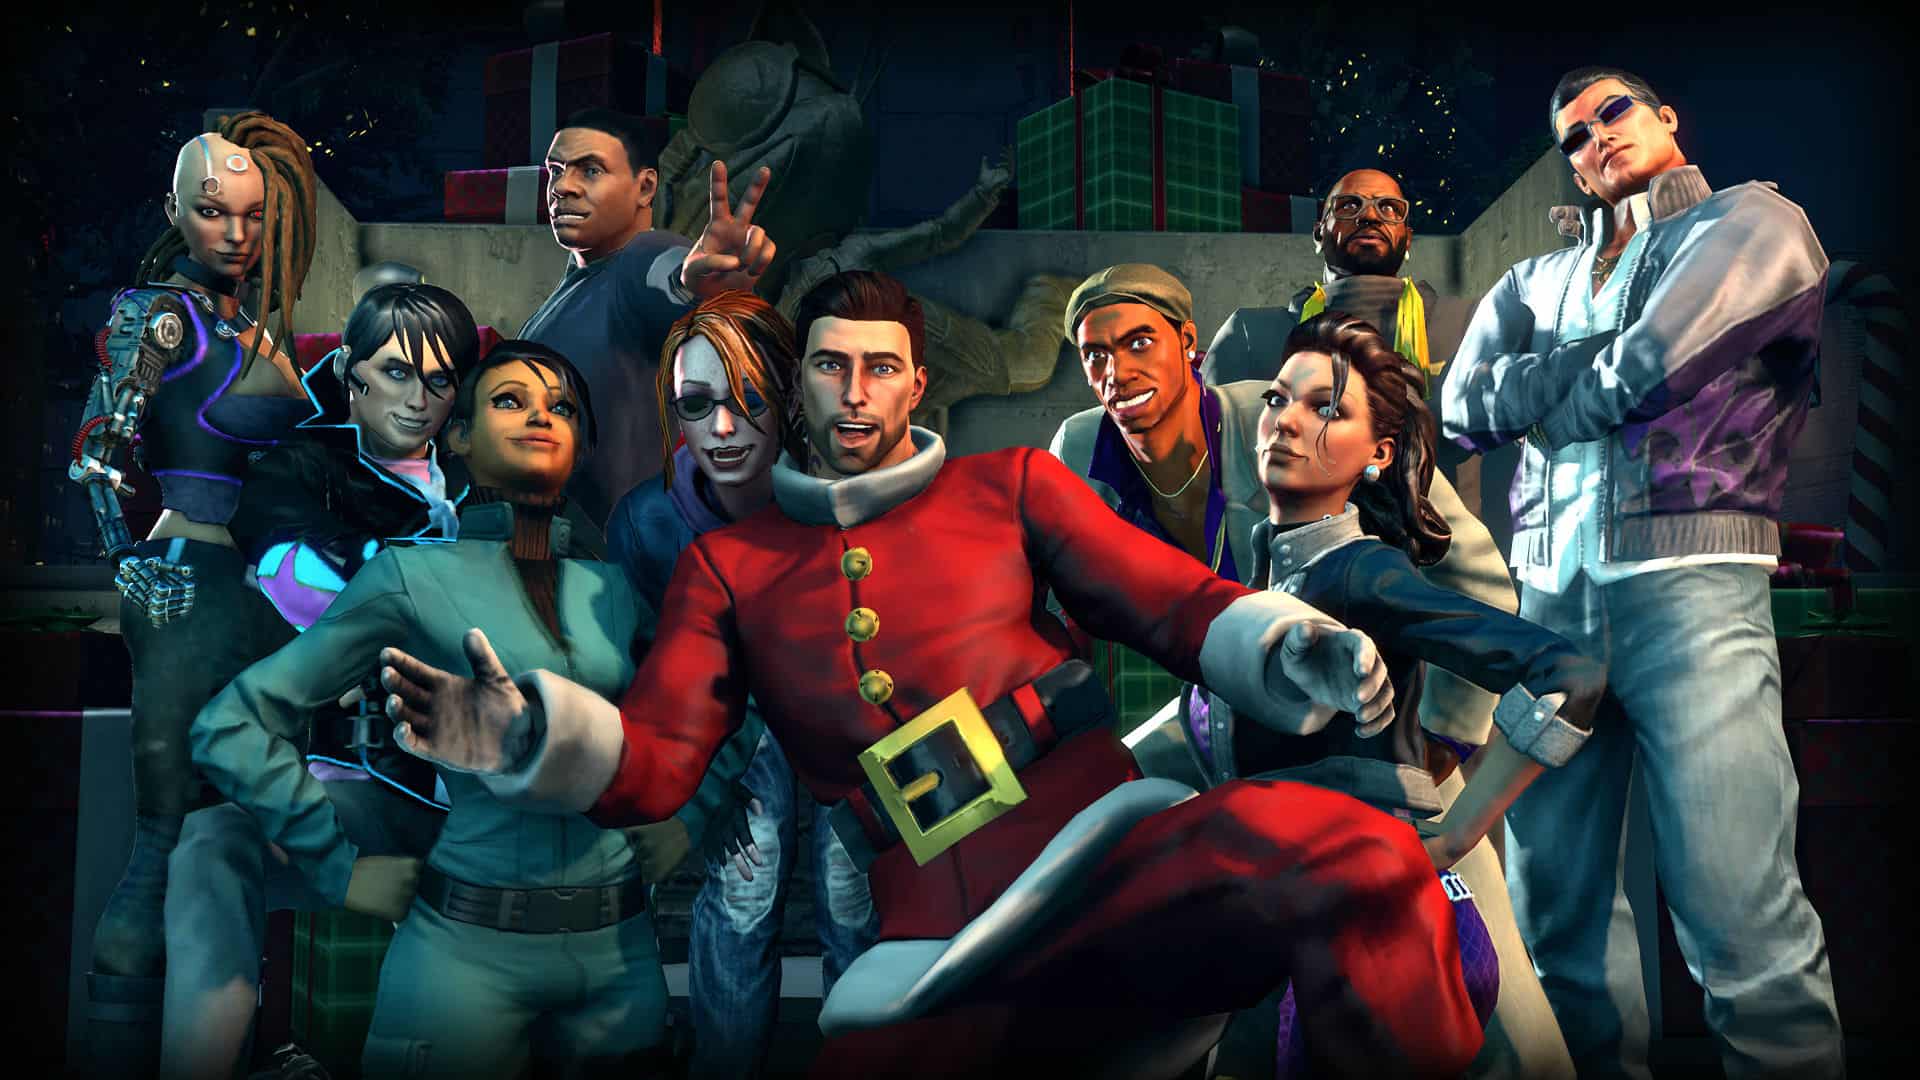 Join the Saints as they conquer virtual reality in Saints Row 4!